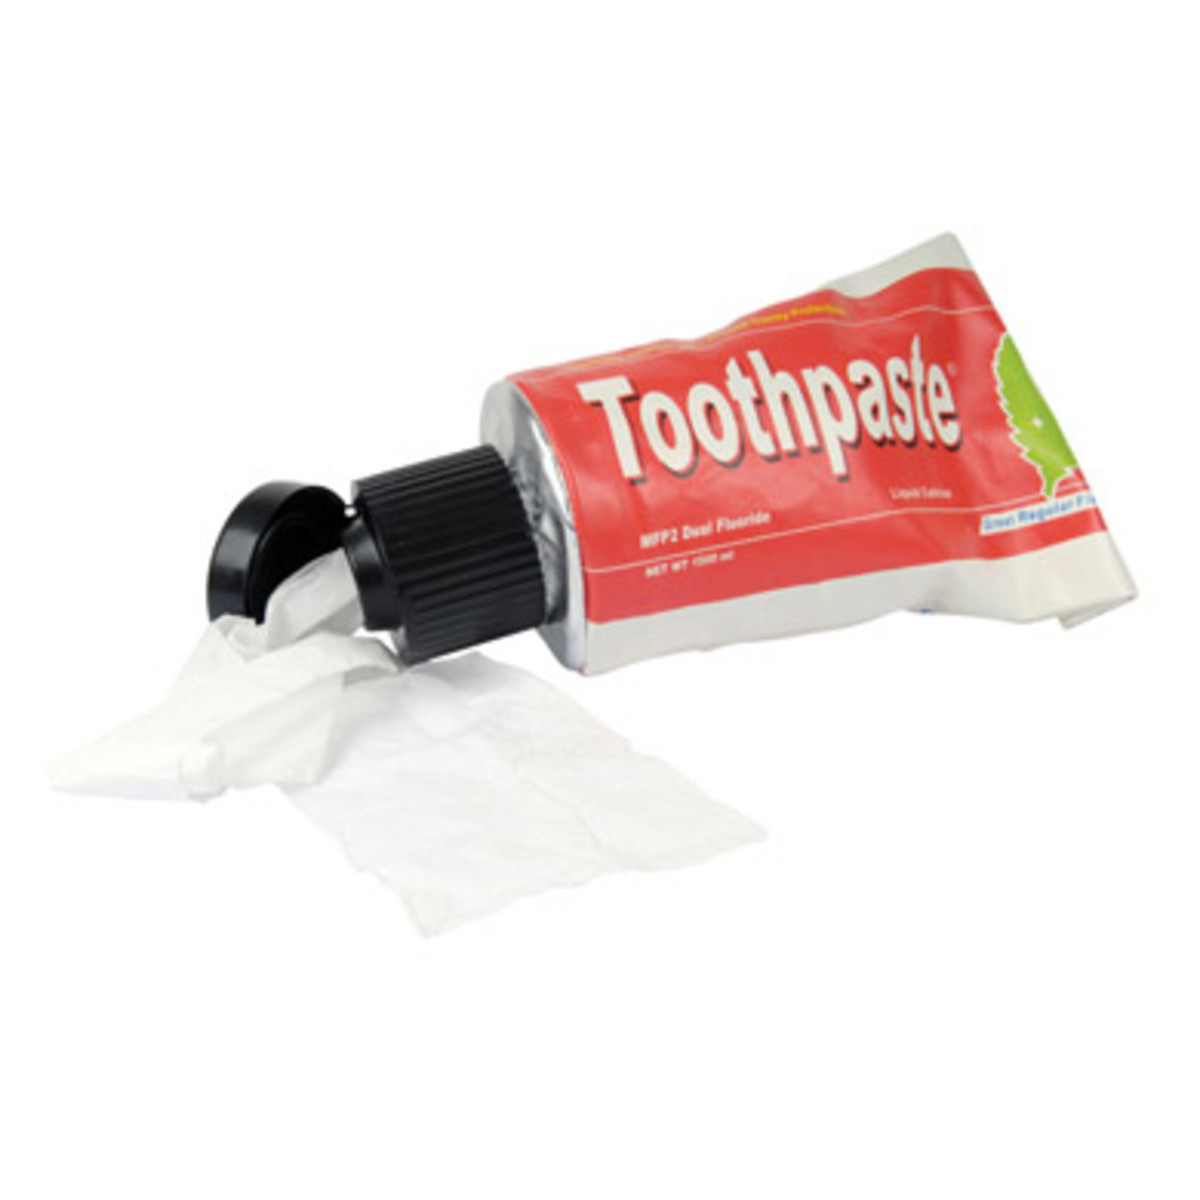 Toothpaste : Other Uses